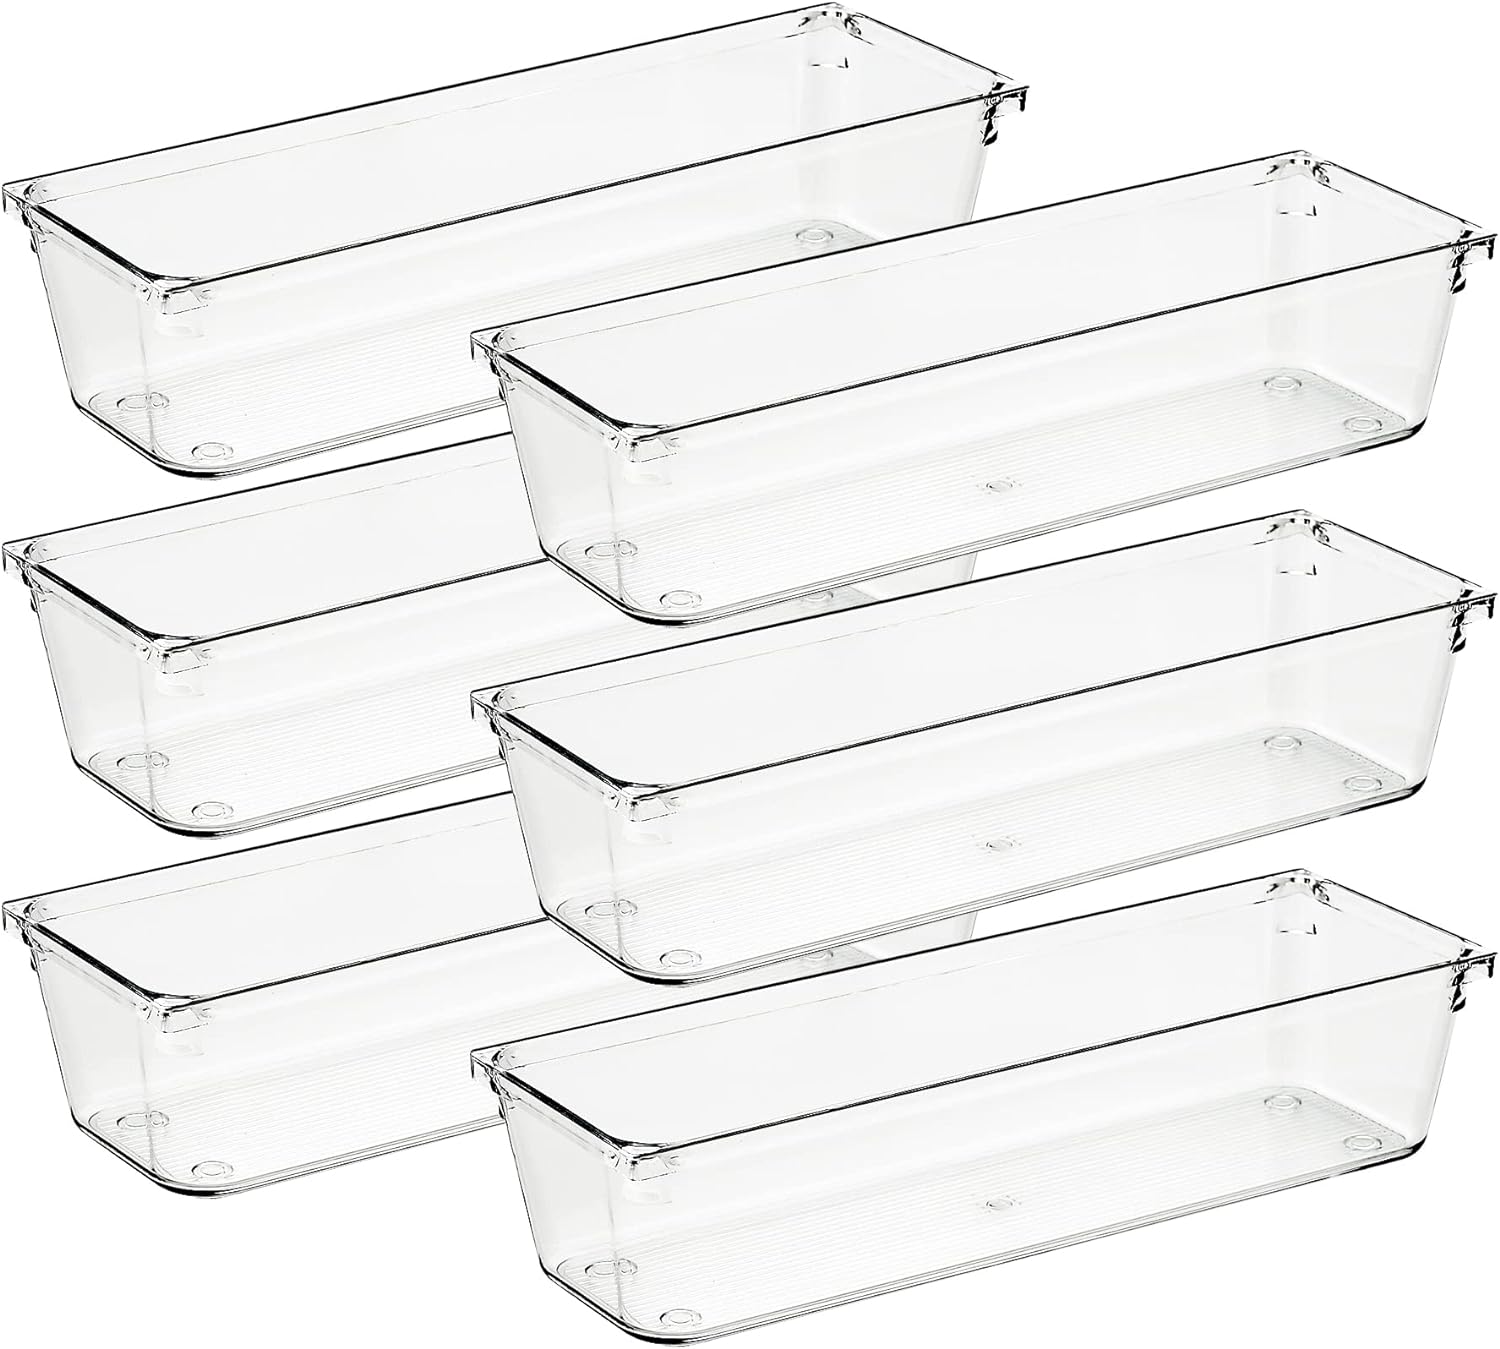 Ravinte 6 Pack Drawer Organizer - 3 X 9 Plastic Storage Bins, Acrylic Organizers with Non-Slip Pads Clear Desk Storage Tray for Makeup, Jewelries, Kitchen Utensils, Bathroom and Office